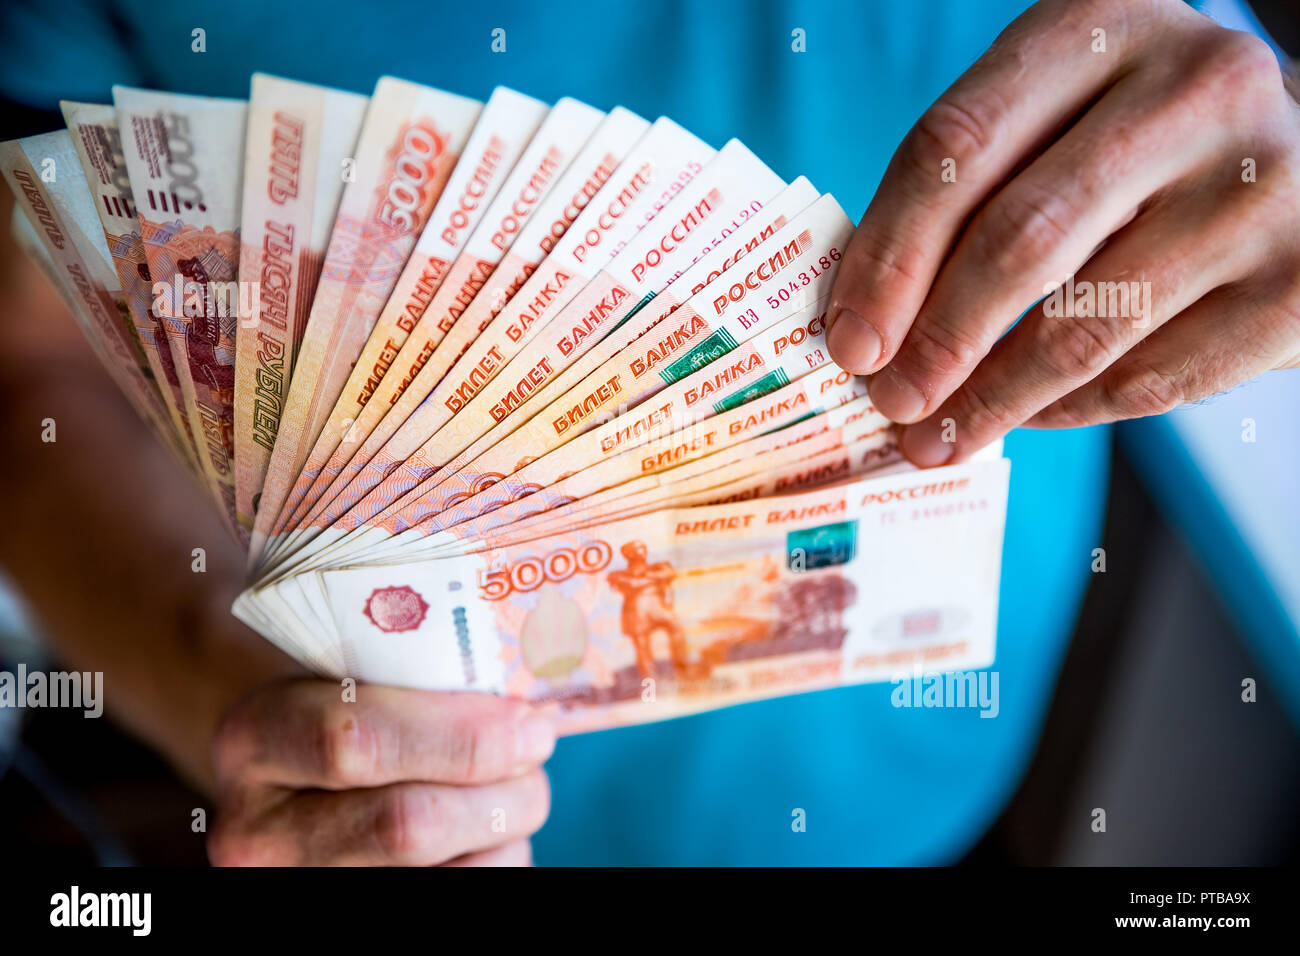 Russian rubles in the hand of a fan.male hand holding many of the Russian banknotes.The transfer of money.The isolated five-thousandth of Russian rubles denominations in a hand Stock Photo